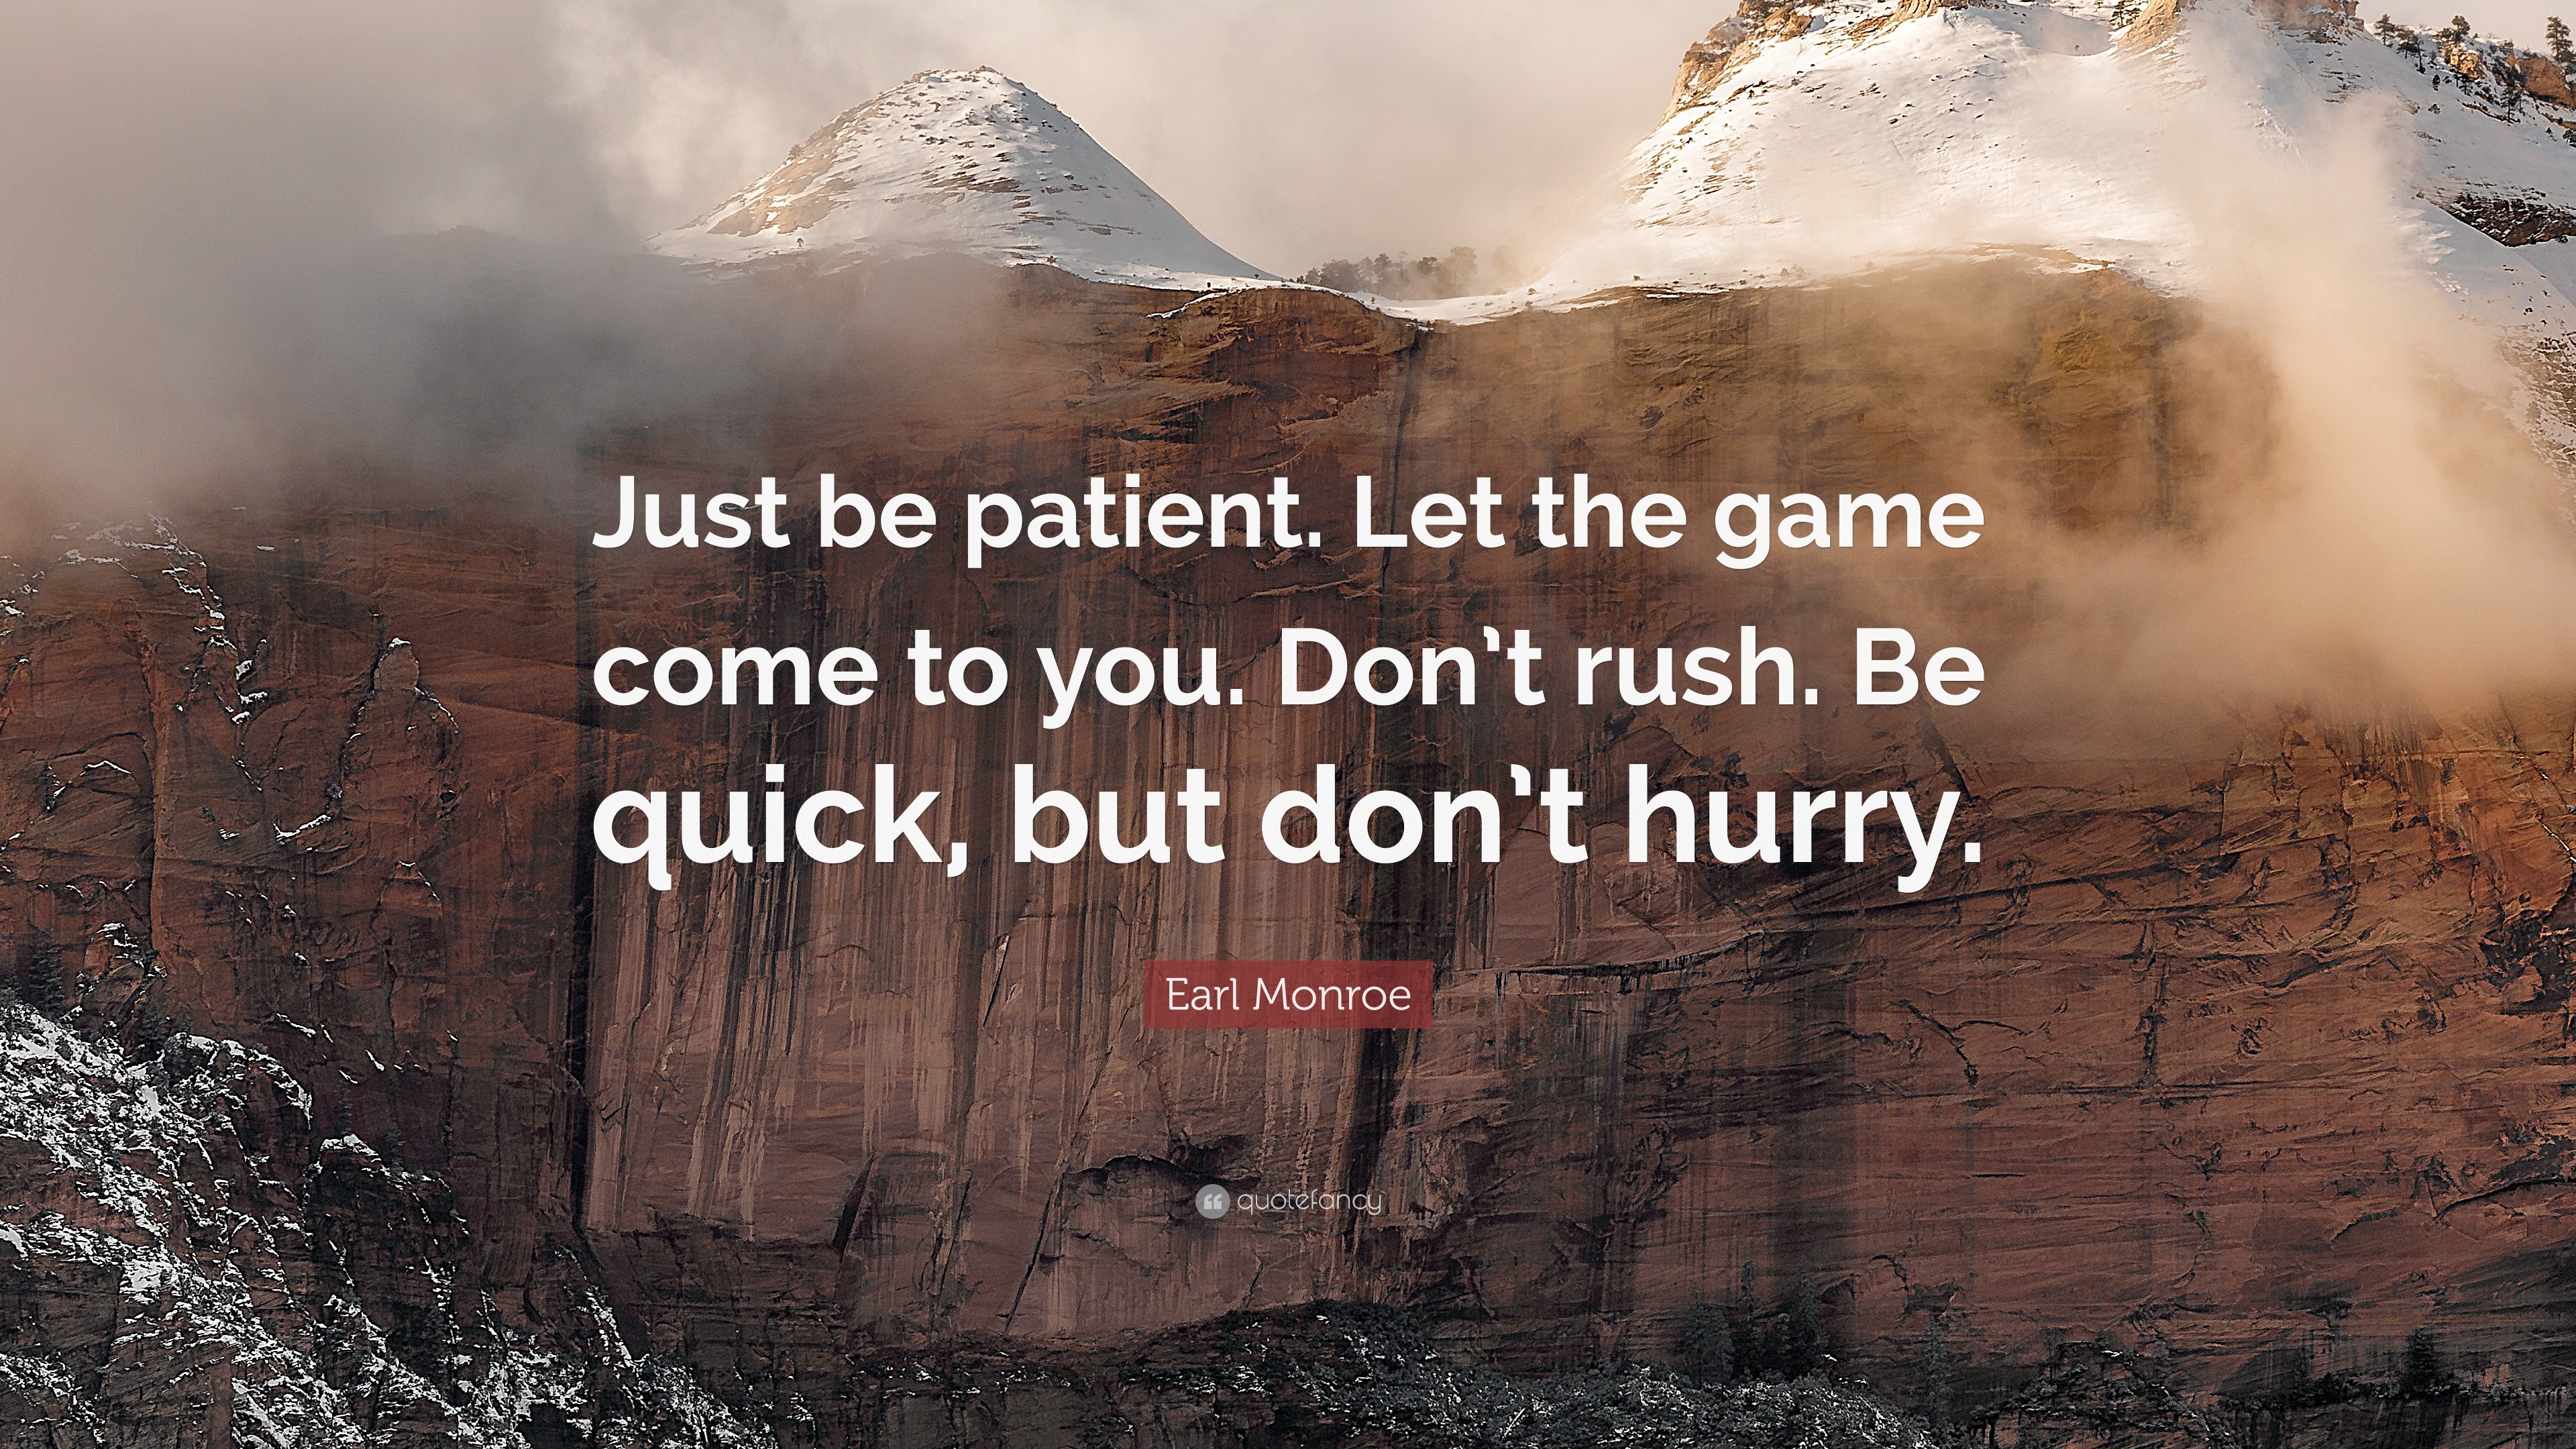 Earl Monroe - Just be patient. Let the game come to you.